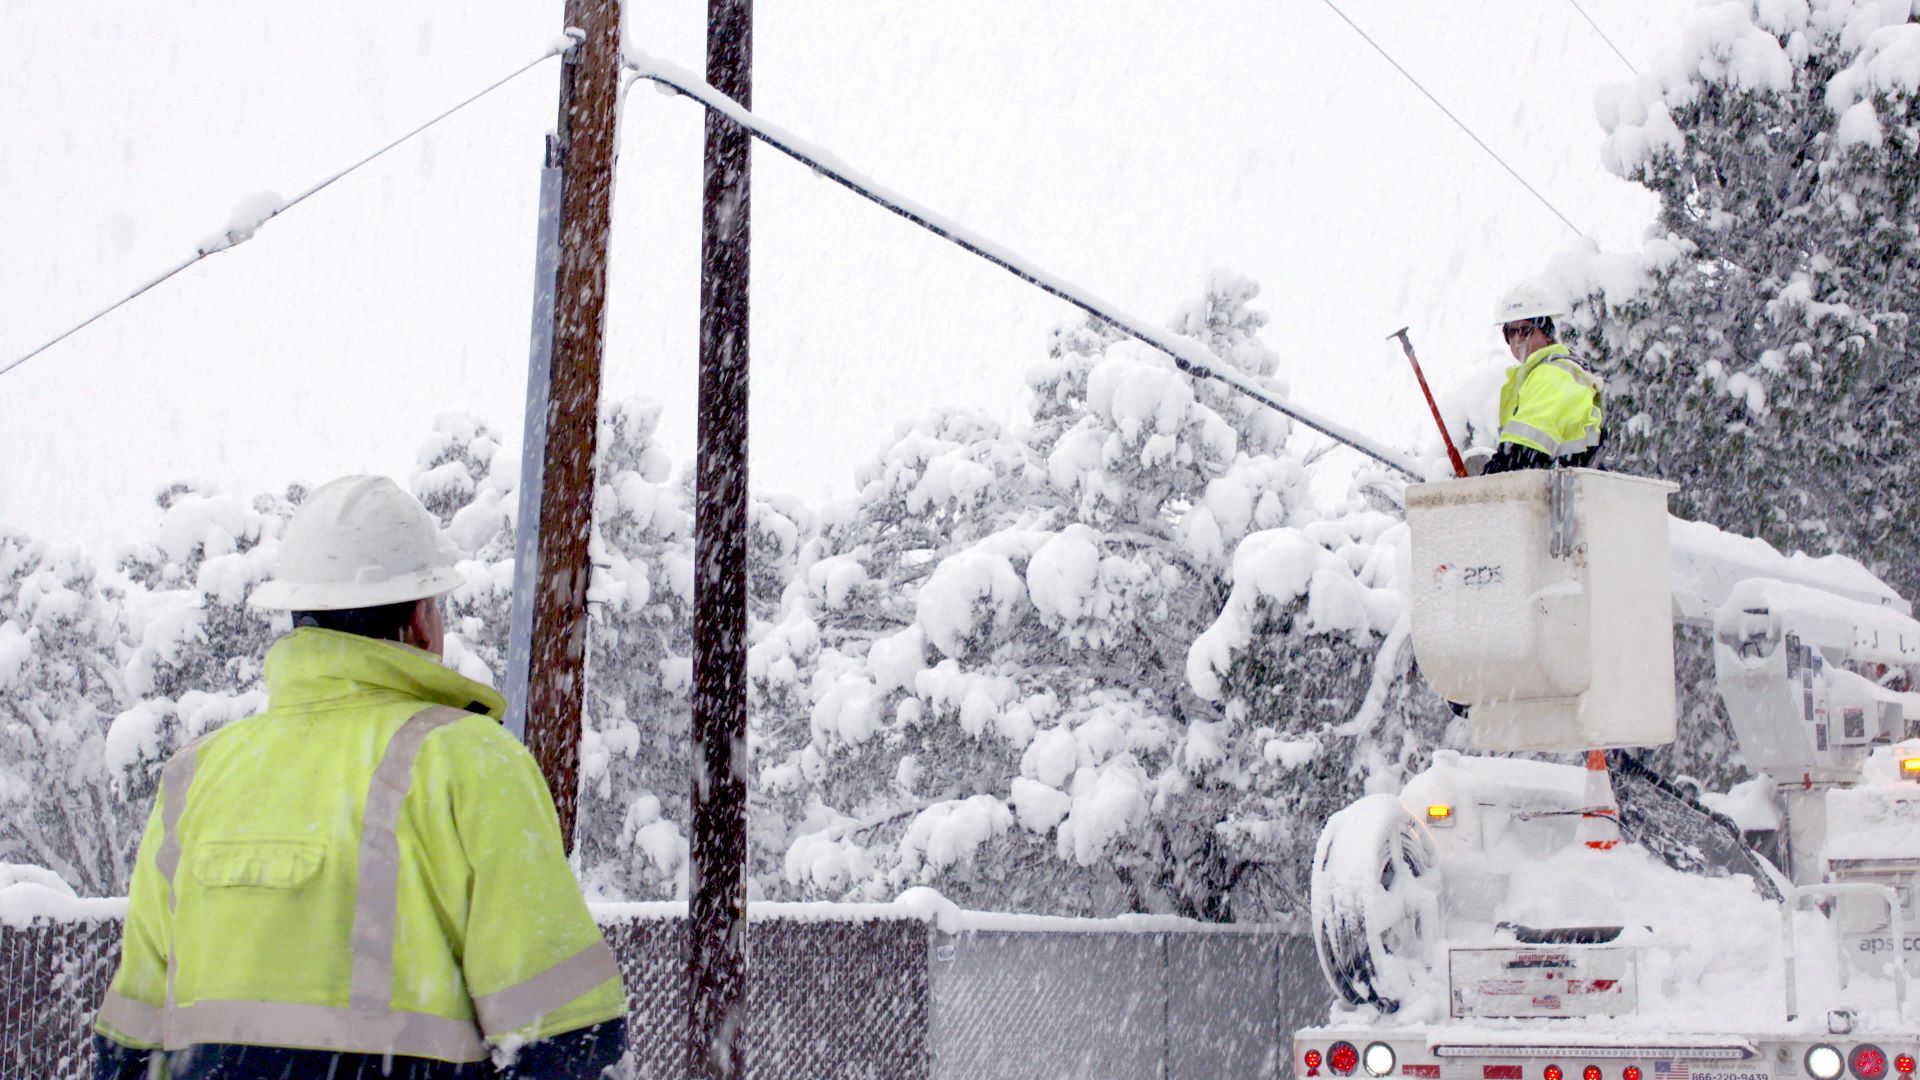 APS workers working on power lines in the snow